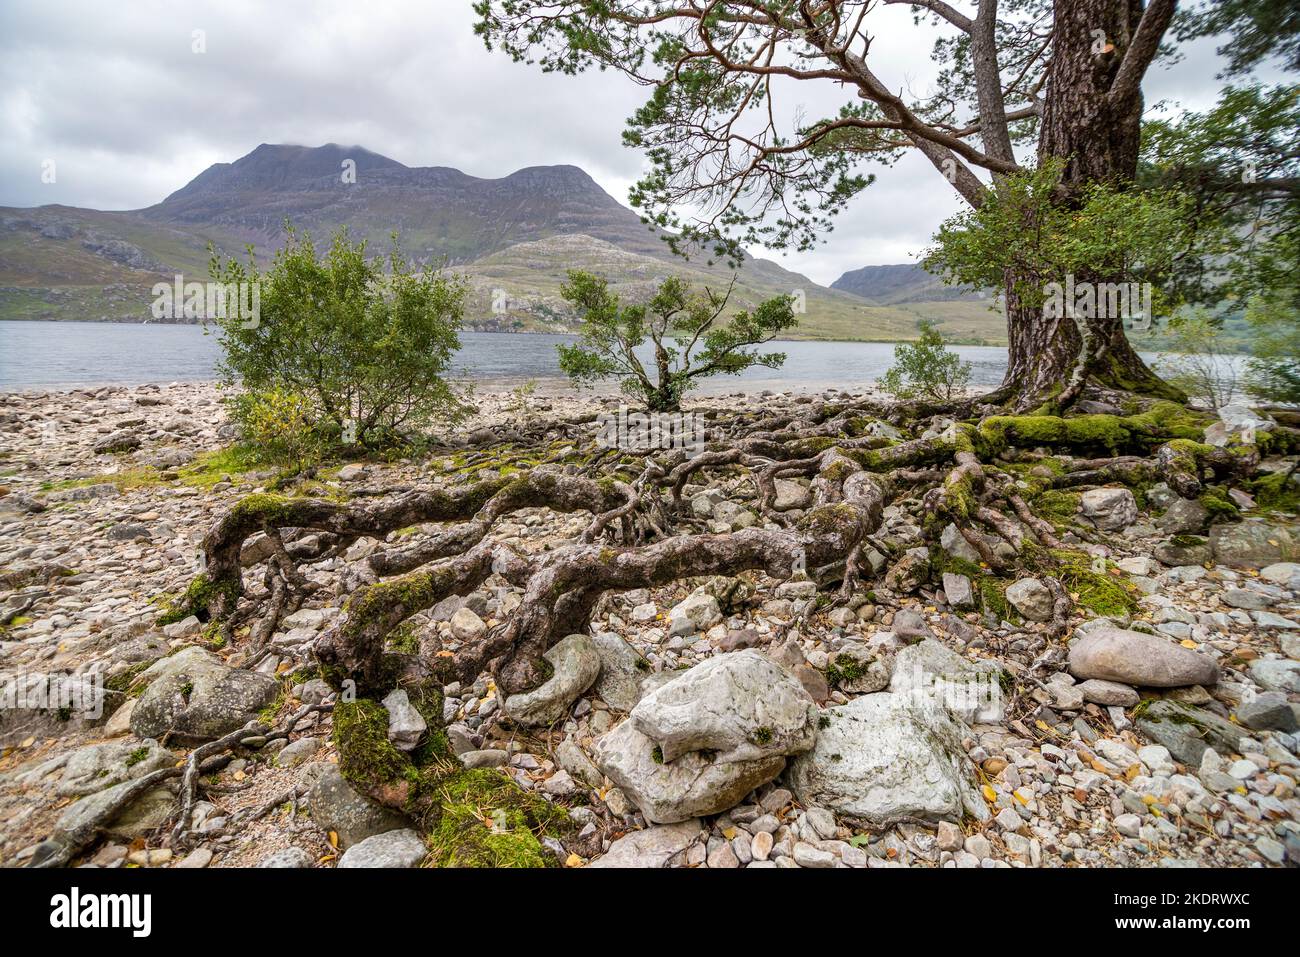 UK, Scotland, Ross and Cromarty, Wester Ross Highlands. Ancient pinewoods of Beinn Eighe National Nature Reserve on the shore beside Loch Maree. Stock Photo